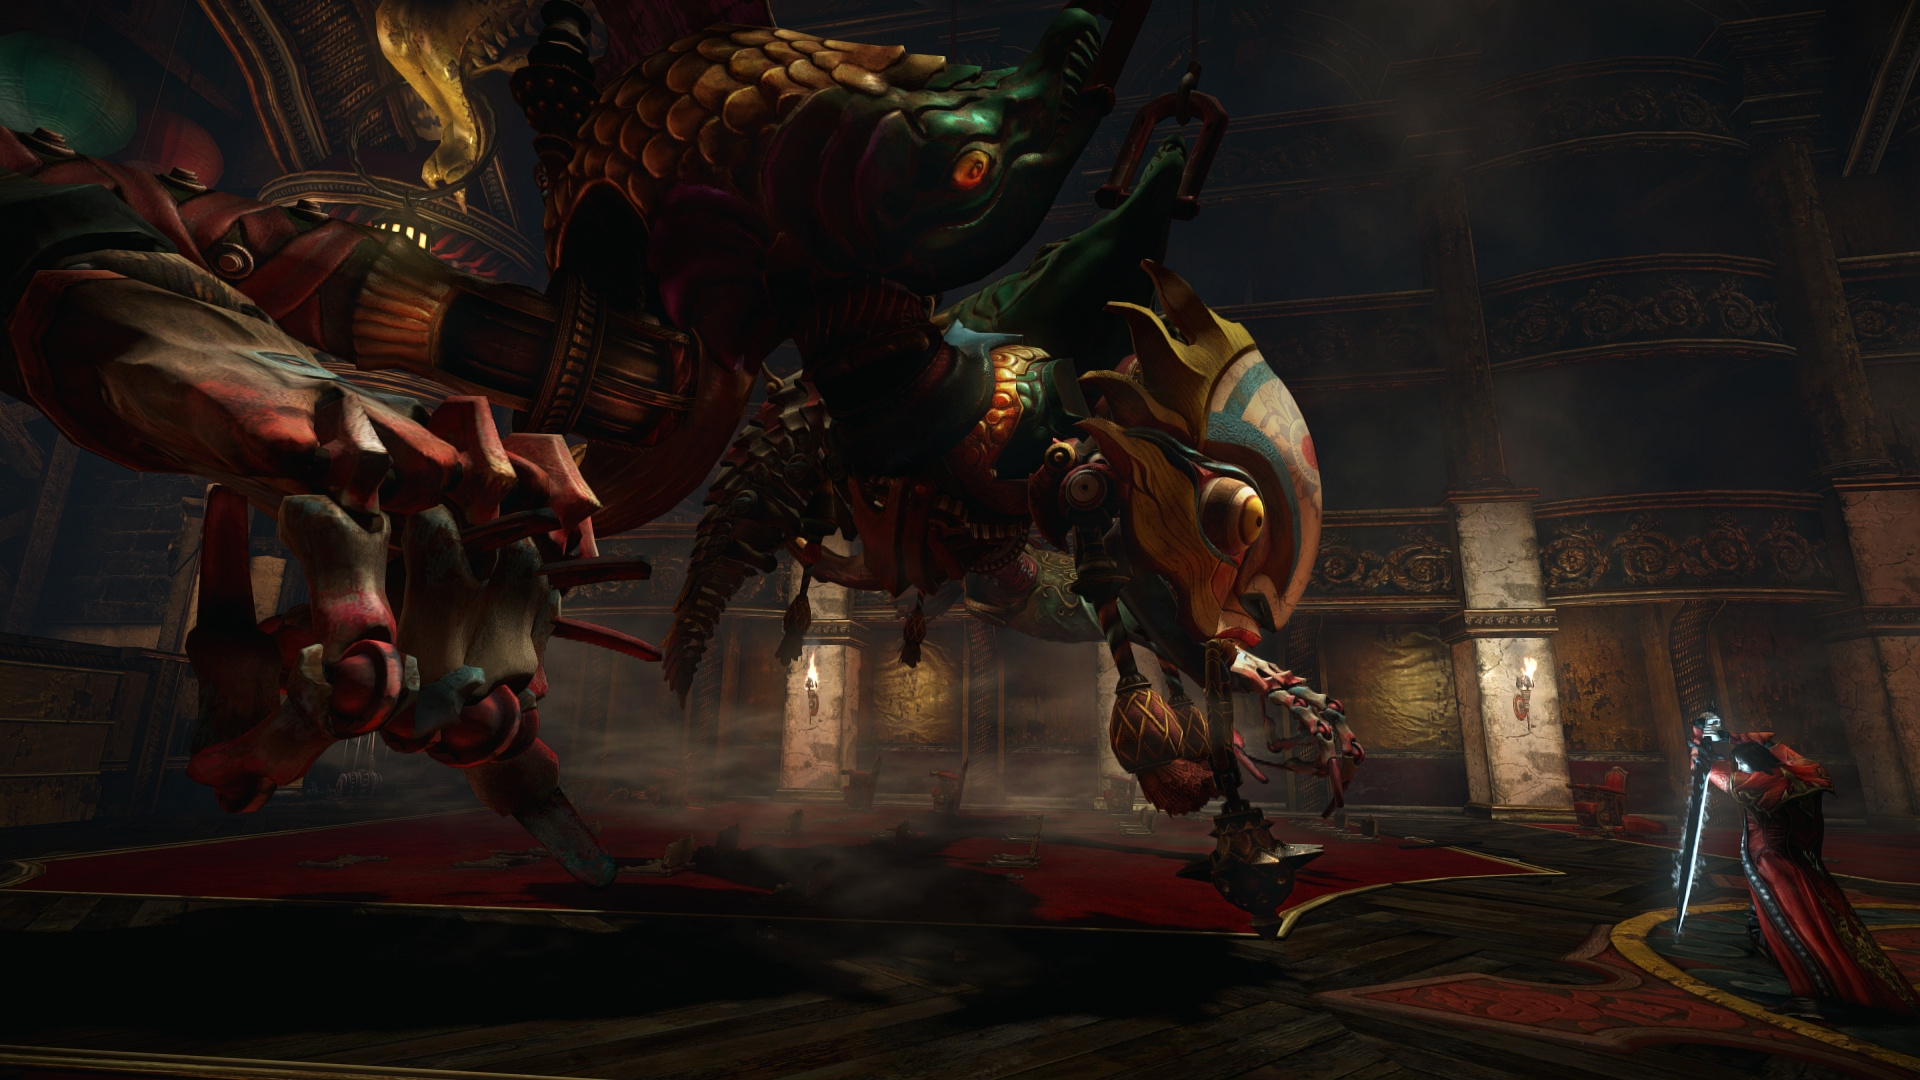 Castlevania: Lords of Shadow 2 – Review